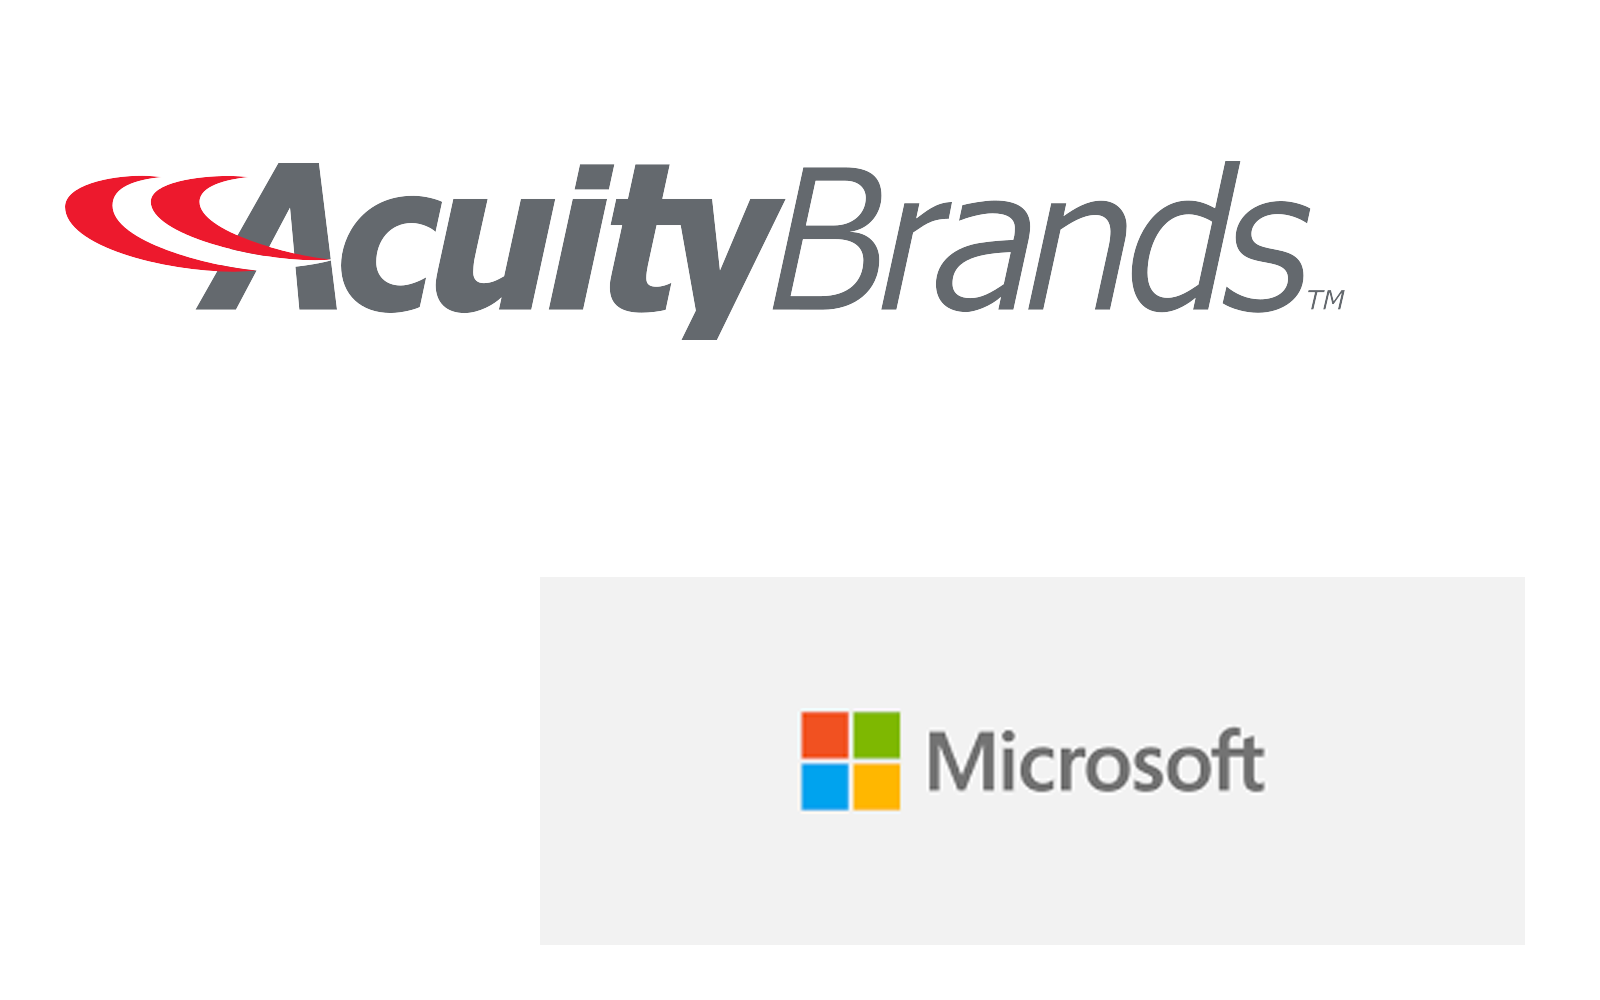 Microsoft and Acuity Brands collaborate to enable sustainable building solutions